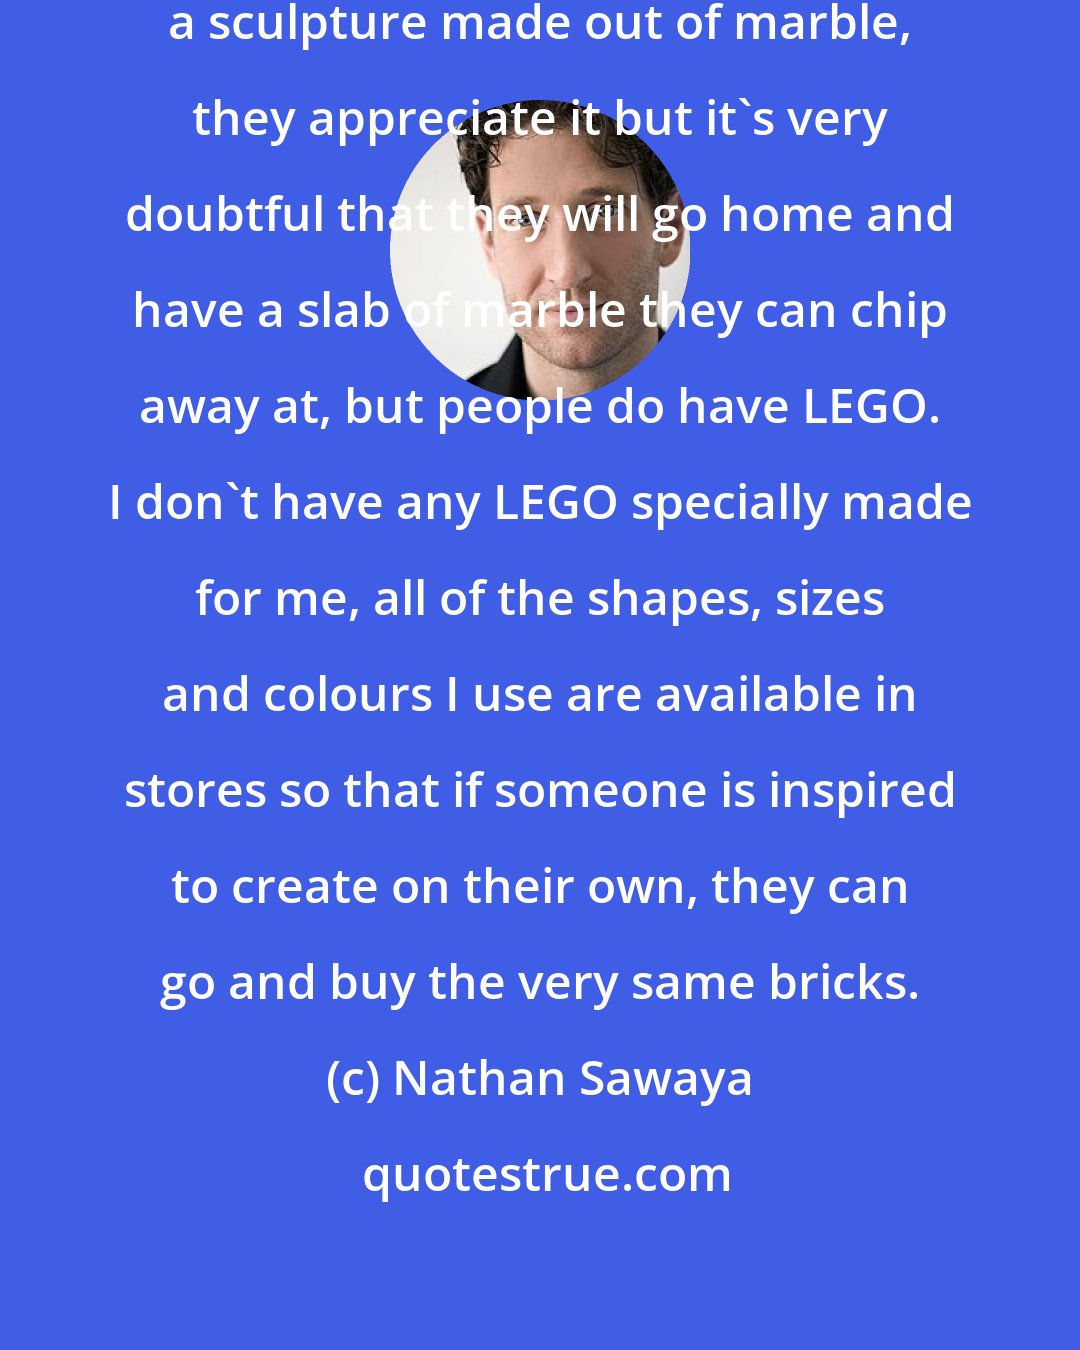 Nathan Sawaya: When people go to museums and see a sculpture made out of marble, they appreciate it but it's very doubtful that they will go home and have a slab of marble they can chip away at, but people do have LEGO. I don't have any LEGO specially made for me, all of the shapes, sizes and colours I use are available in stores so that if someone is inspired to create on their own, they can go and buy the very same bricks.